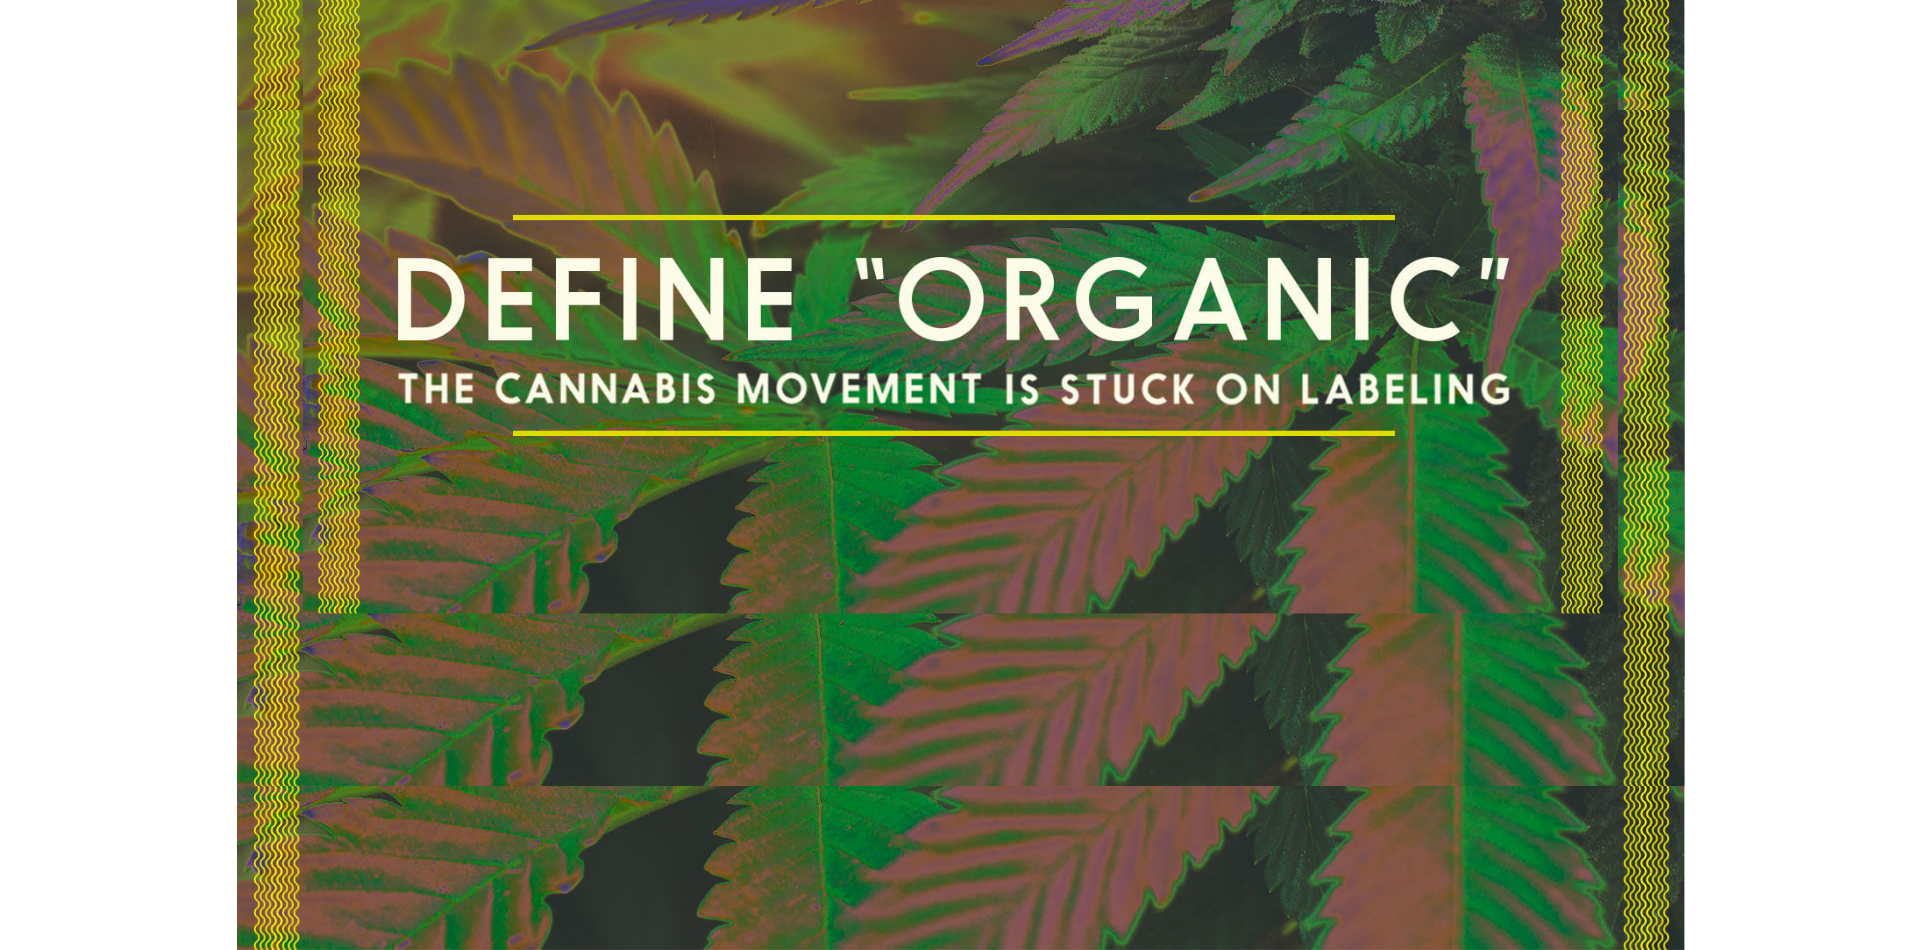 Define “Organic”: The Cannabis Movement Is Stuck On Labeling